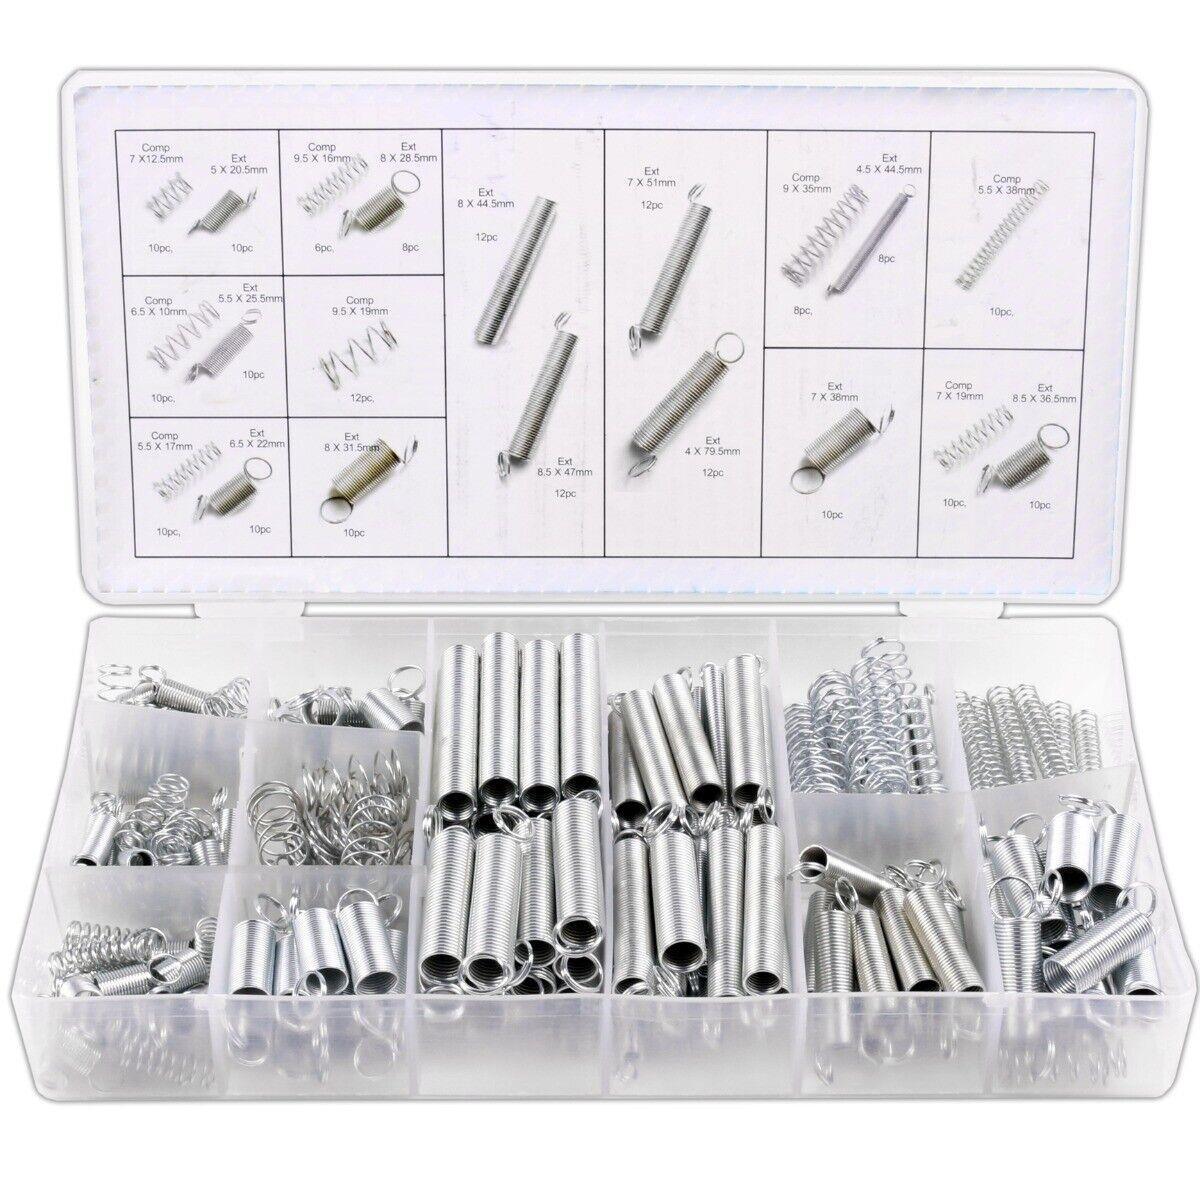 200pc Spring Assortment in compartmented storage case HW156 - Tools 2U Direct SW